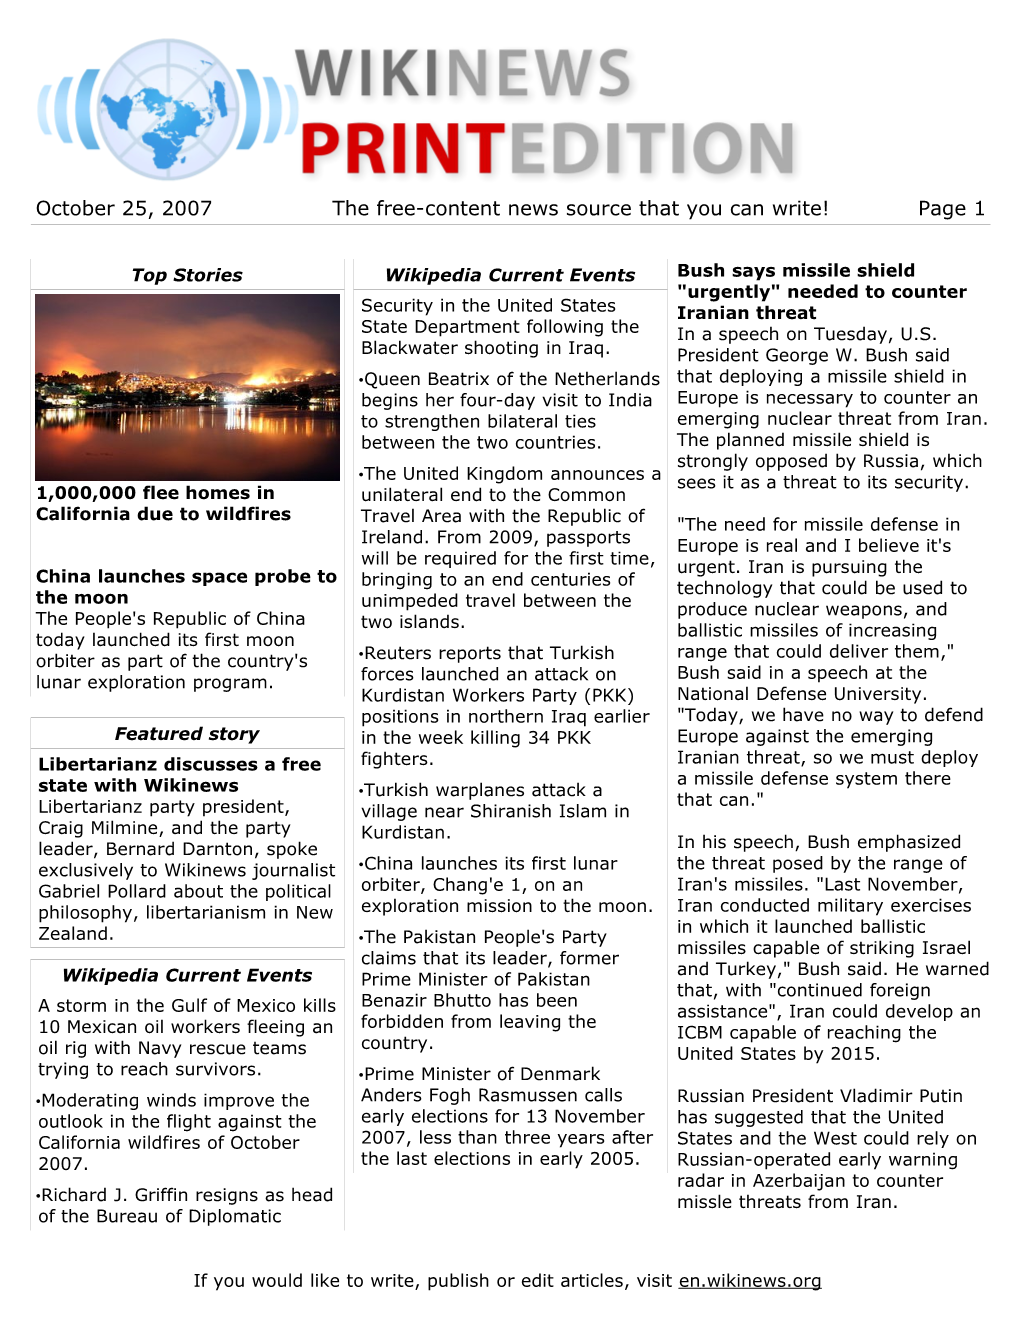 October 25, 2007 the Free-Content News Source That You Can Write! Page 1